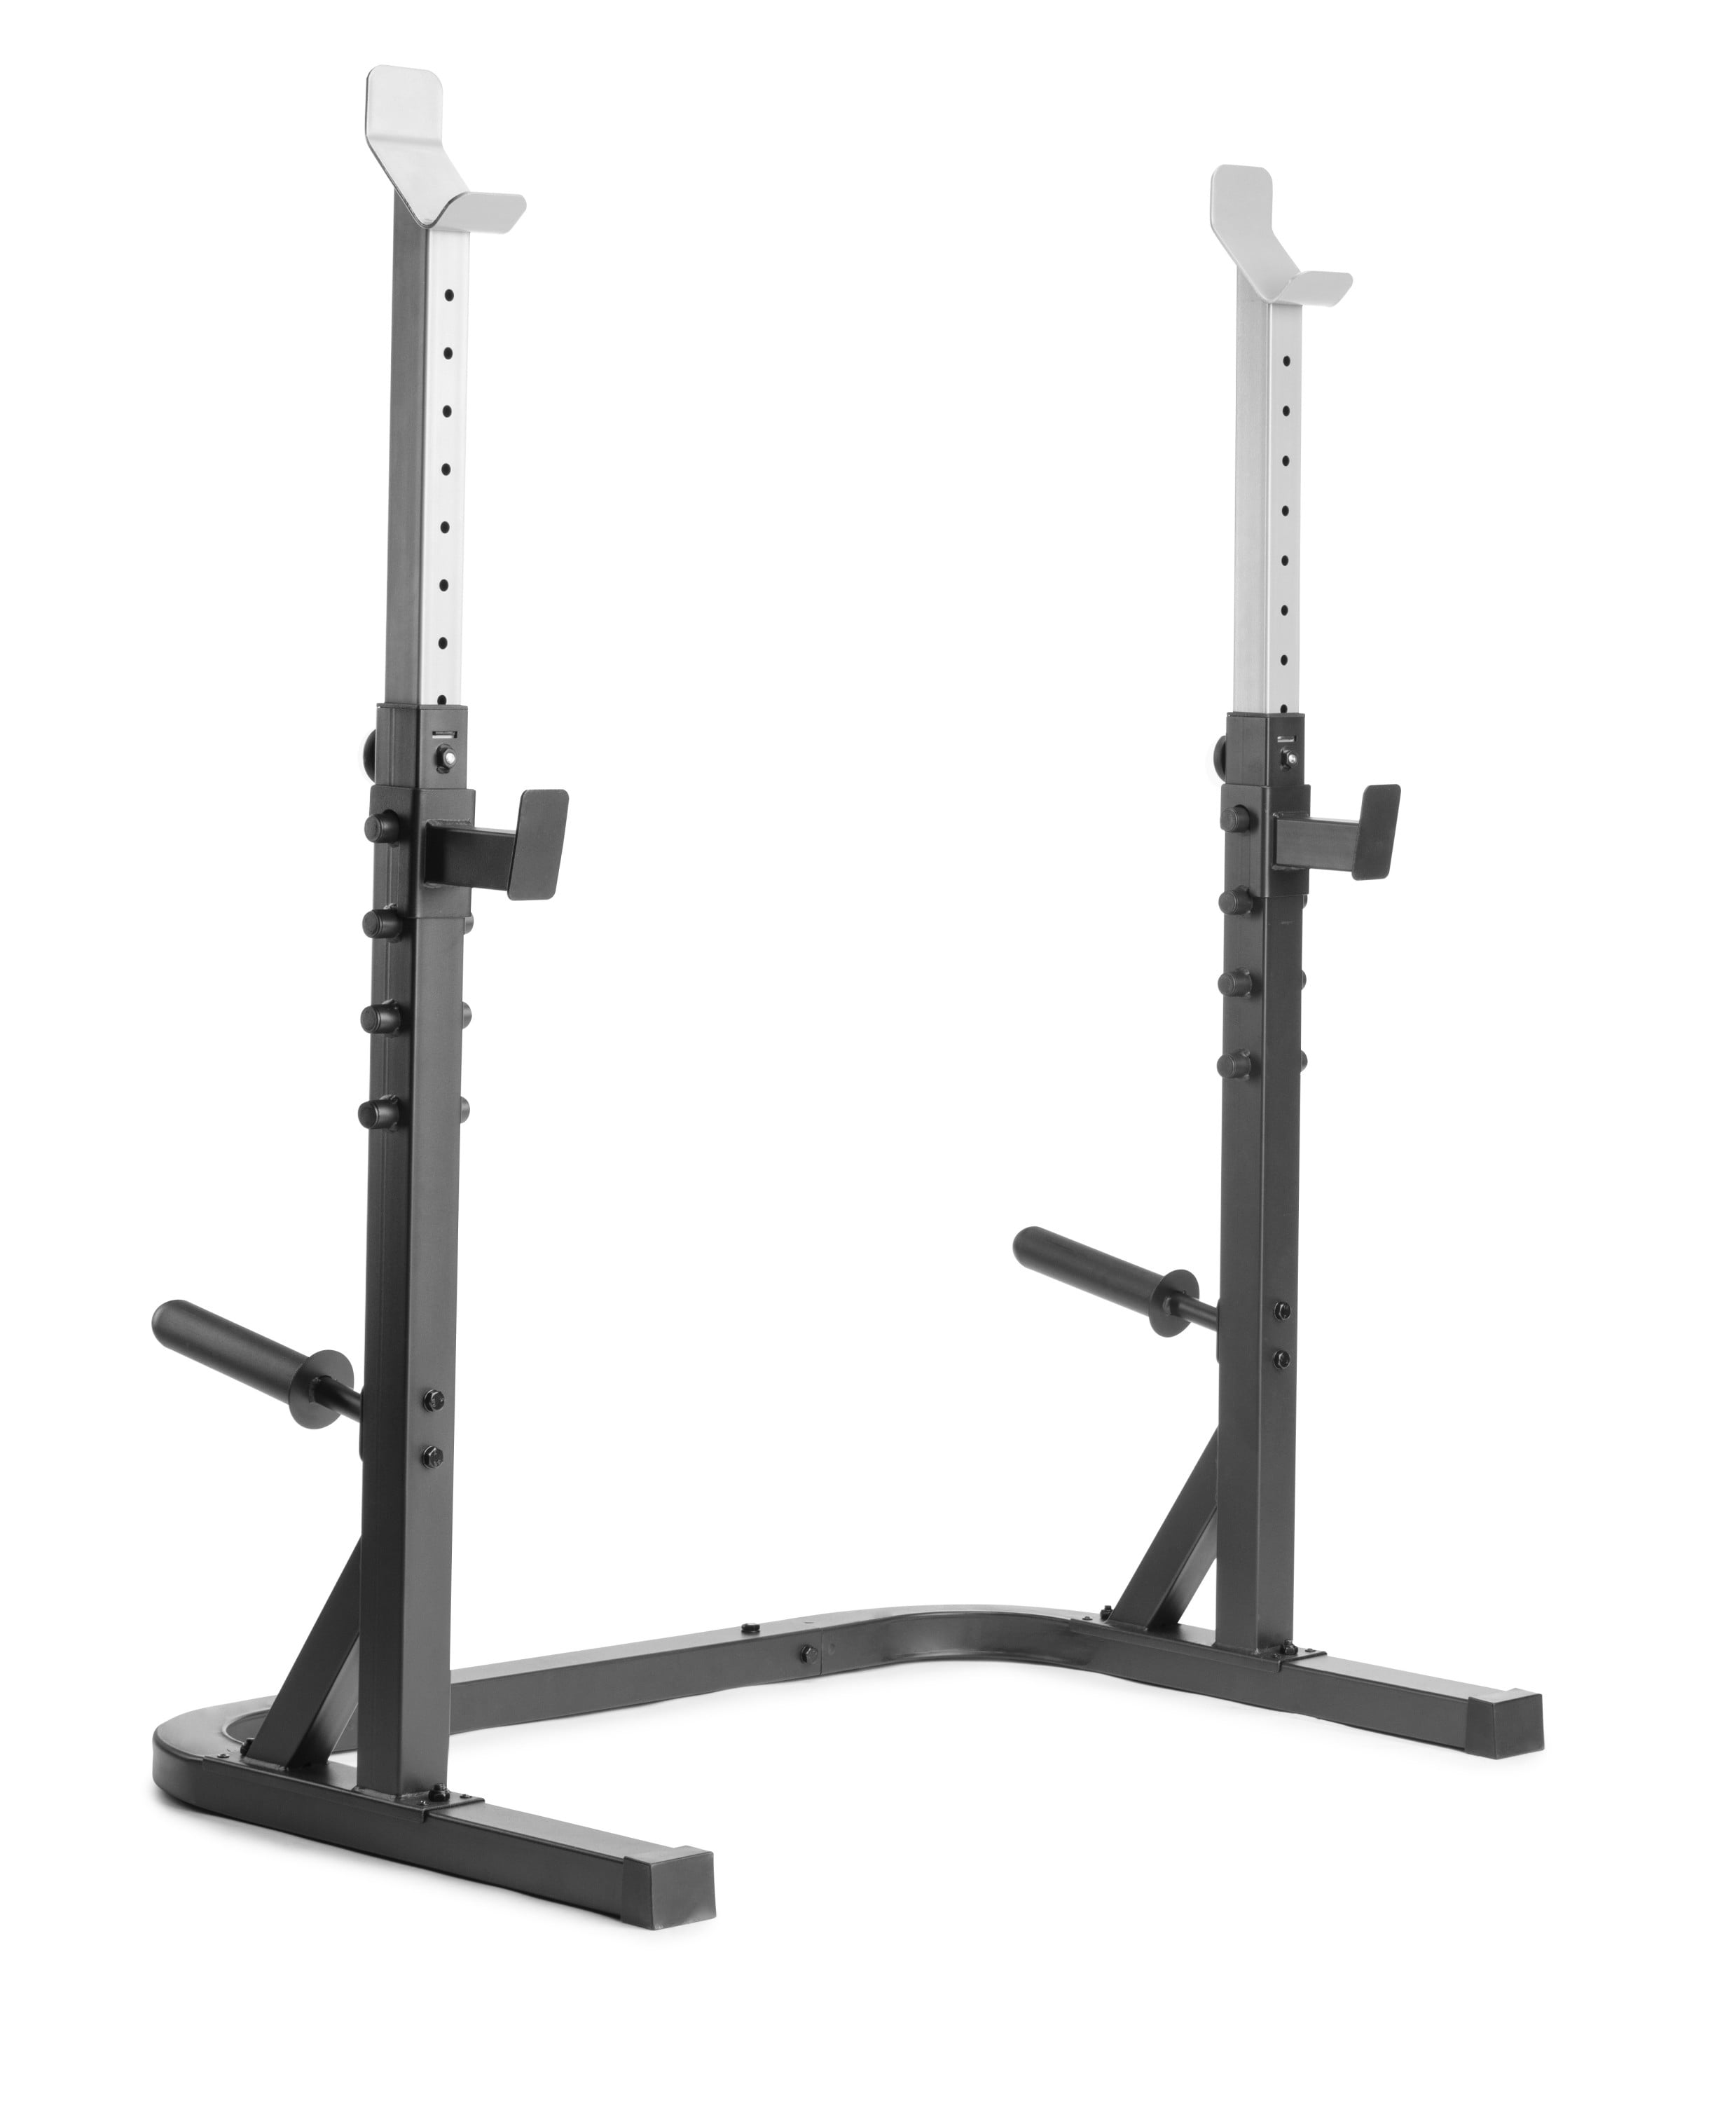 Weider Attack Series Olympic Squat Rack, 310lb Weight Limit